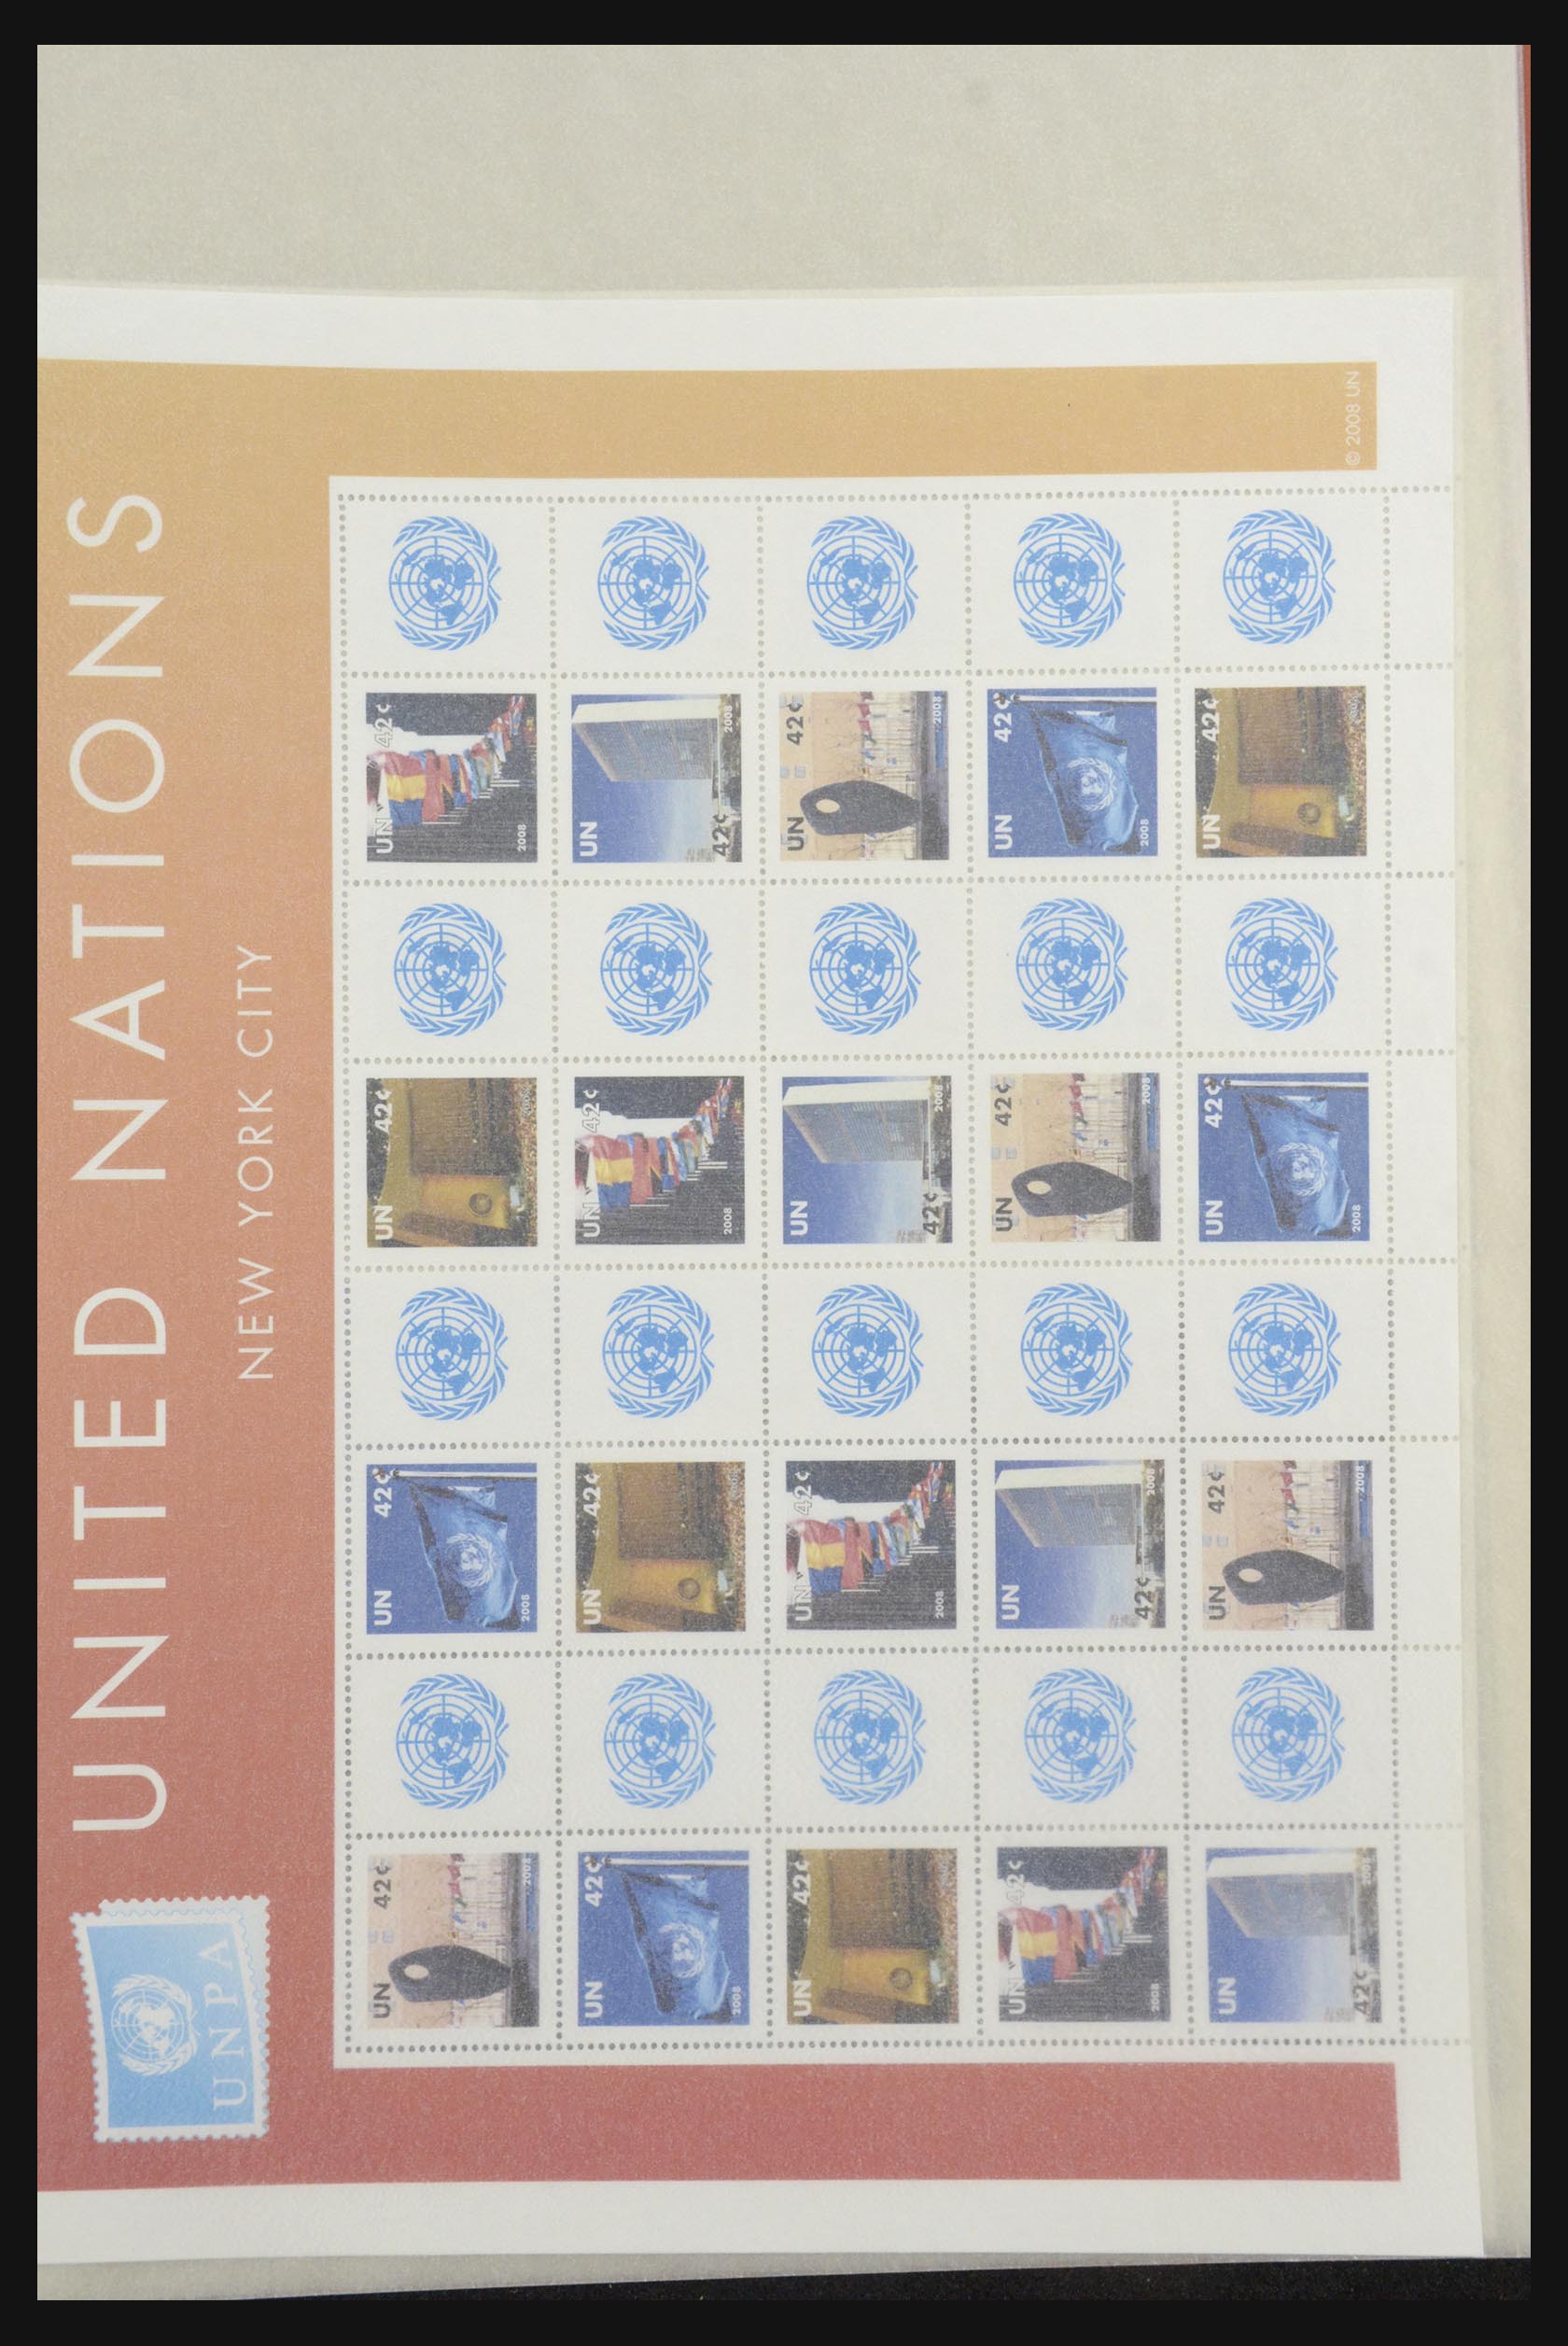 31674 008 - 31674 United Nations personalised sheetlets 2003-2012.